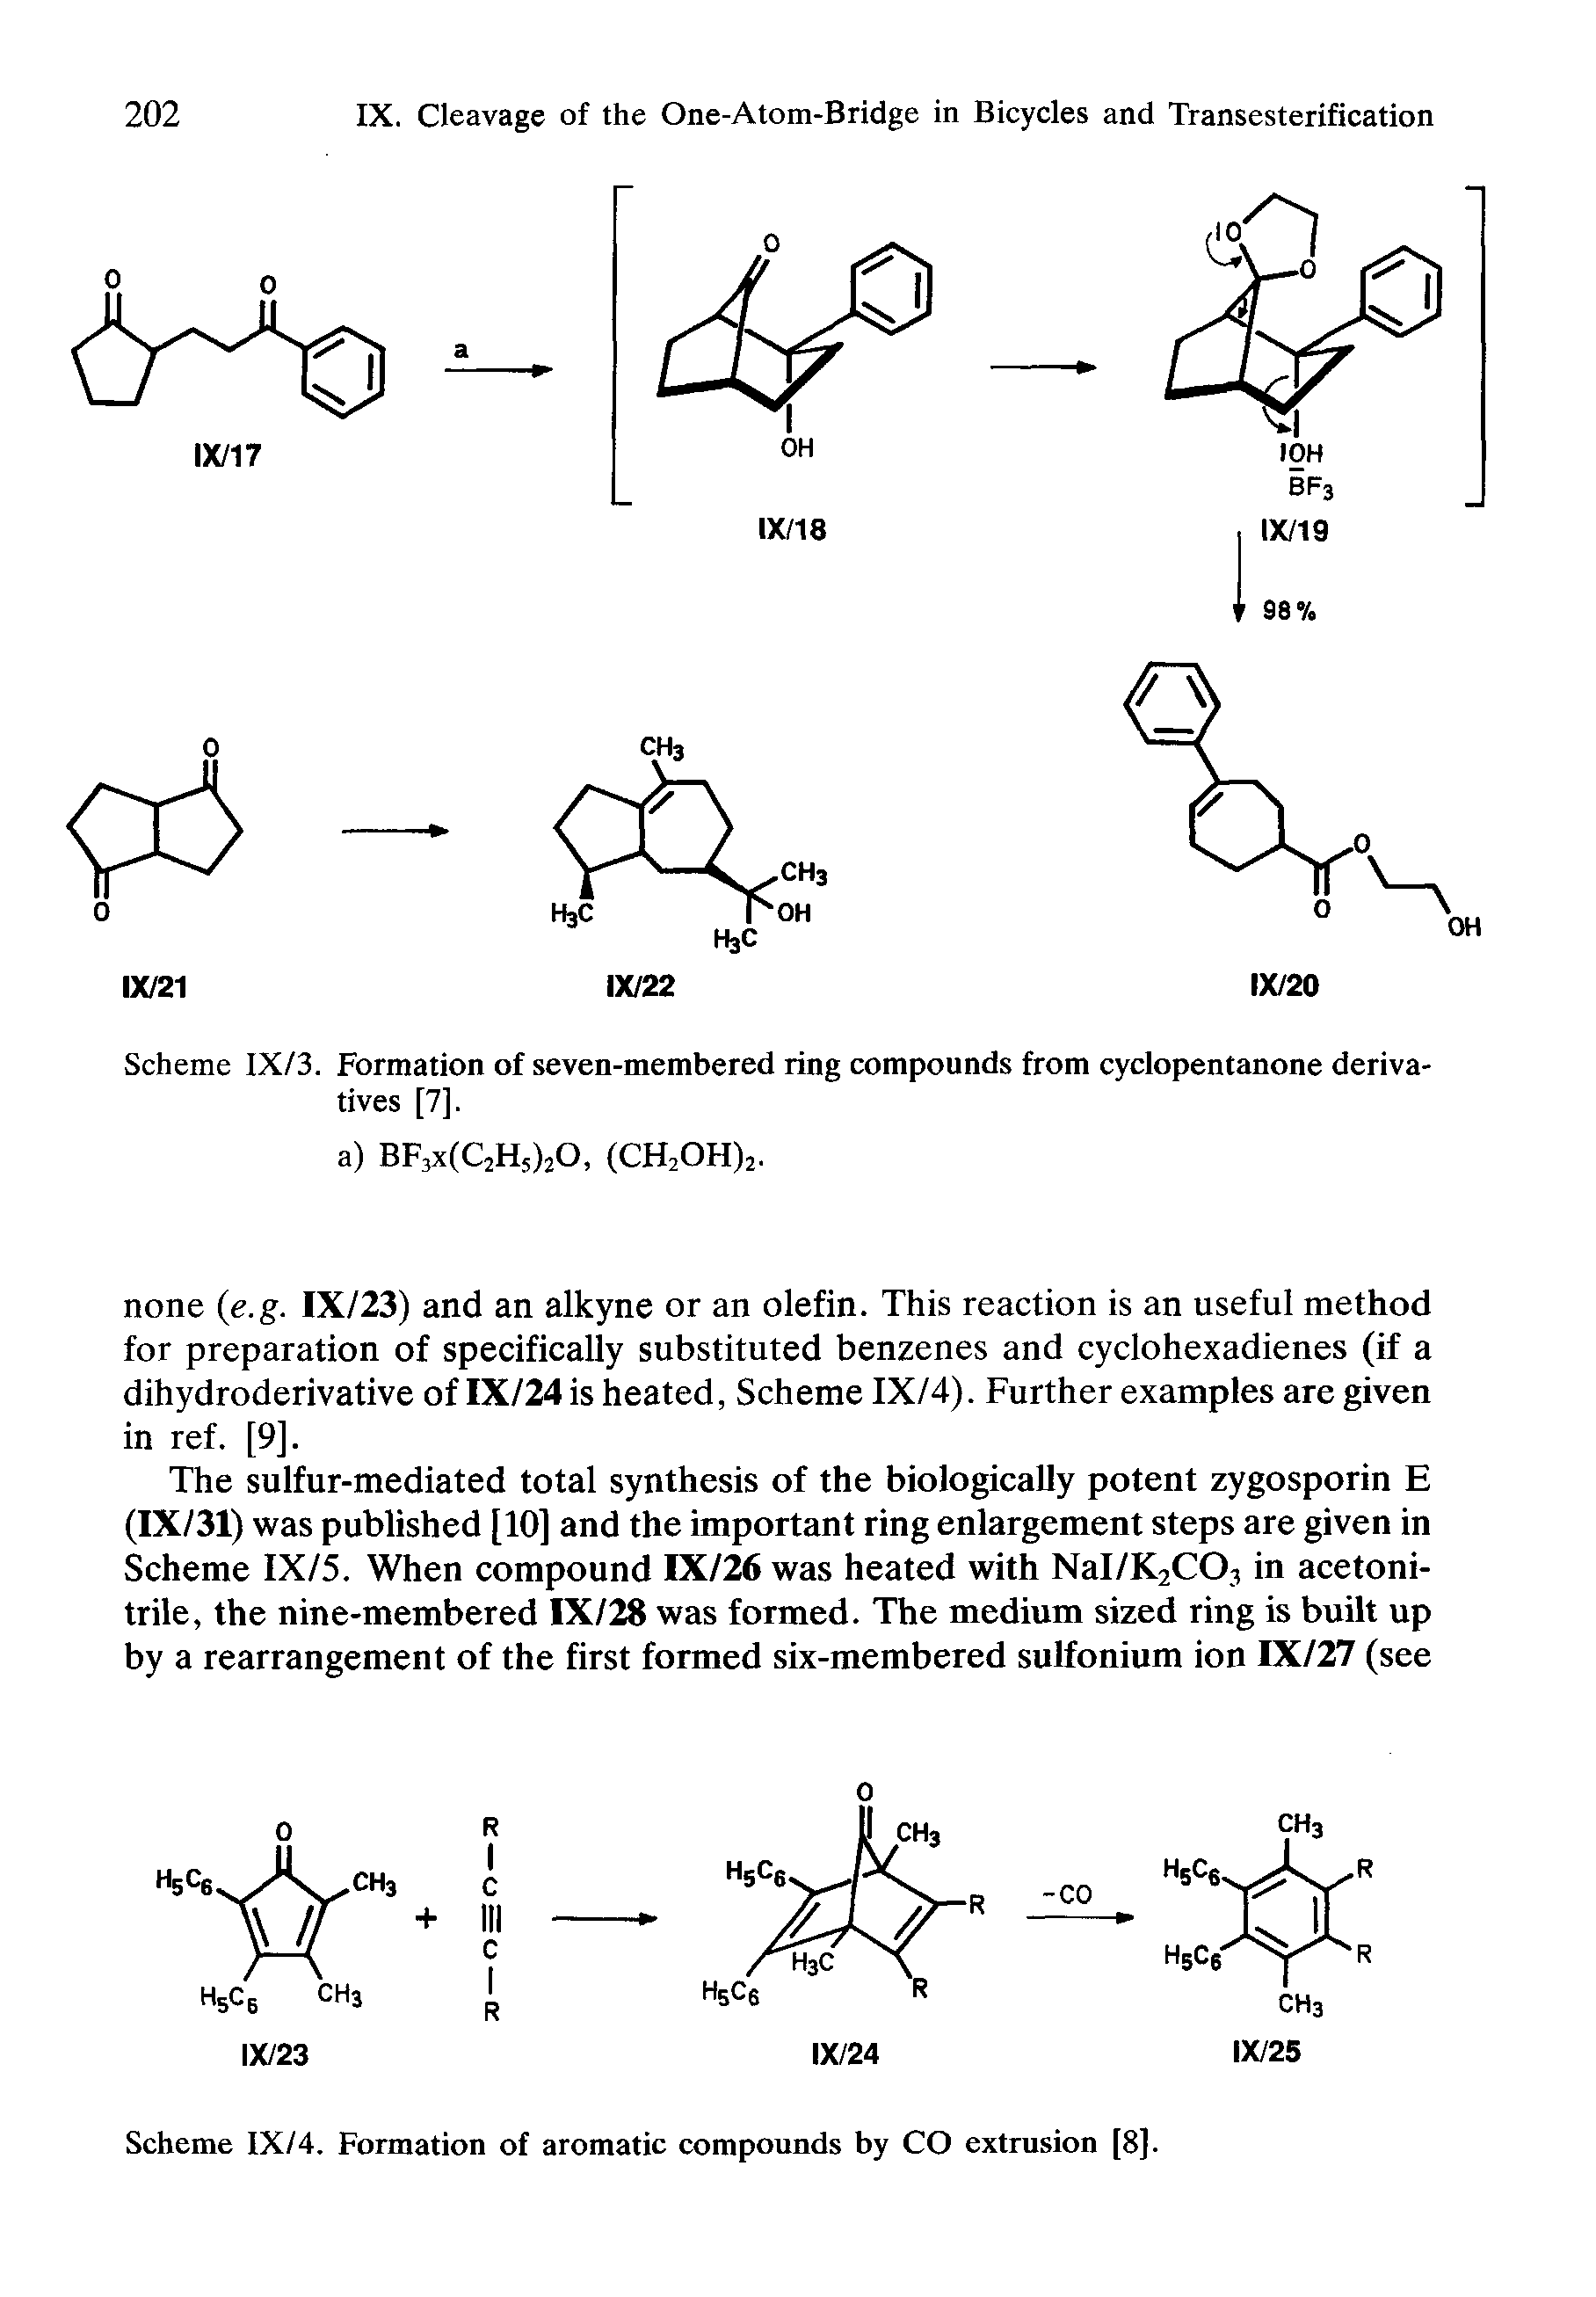 Scheme IX/3. Formation of seven-membered ring compounds from cyclopentanone derivatives [7].